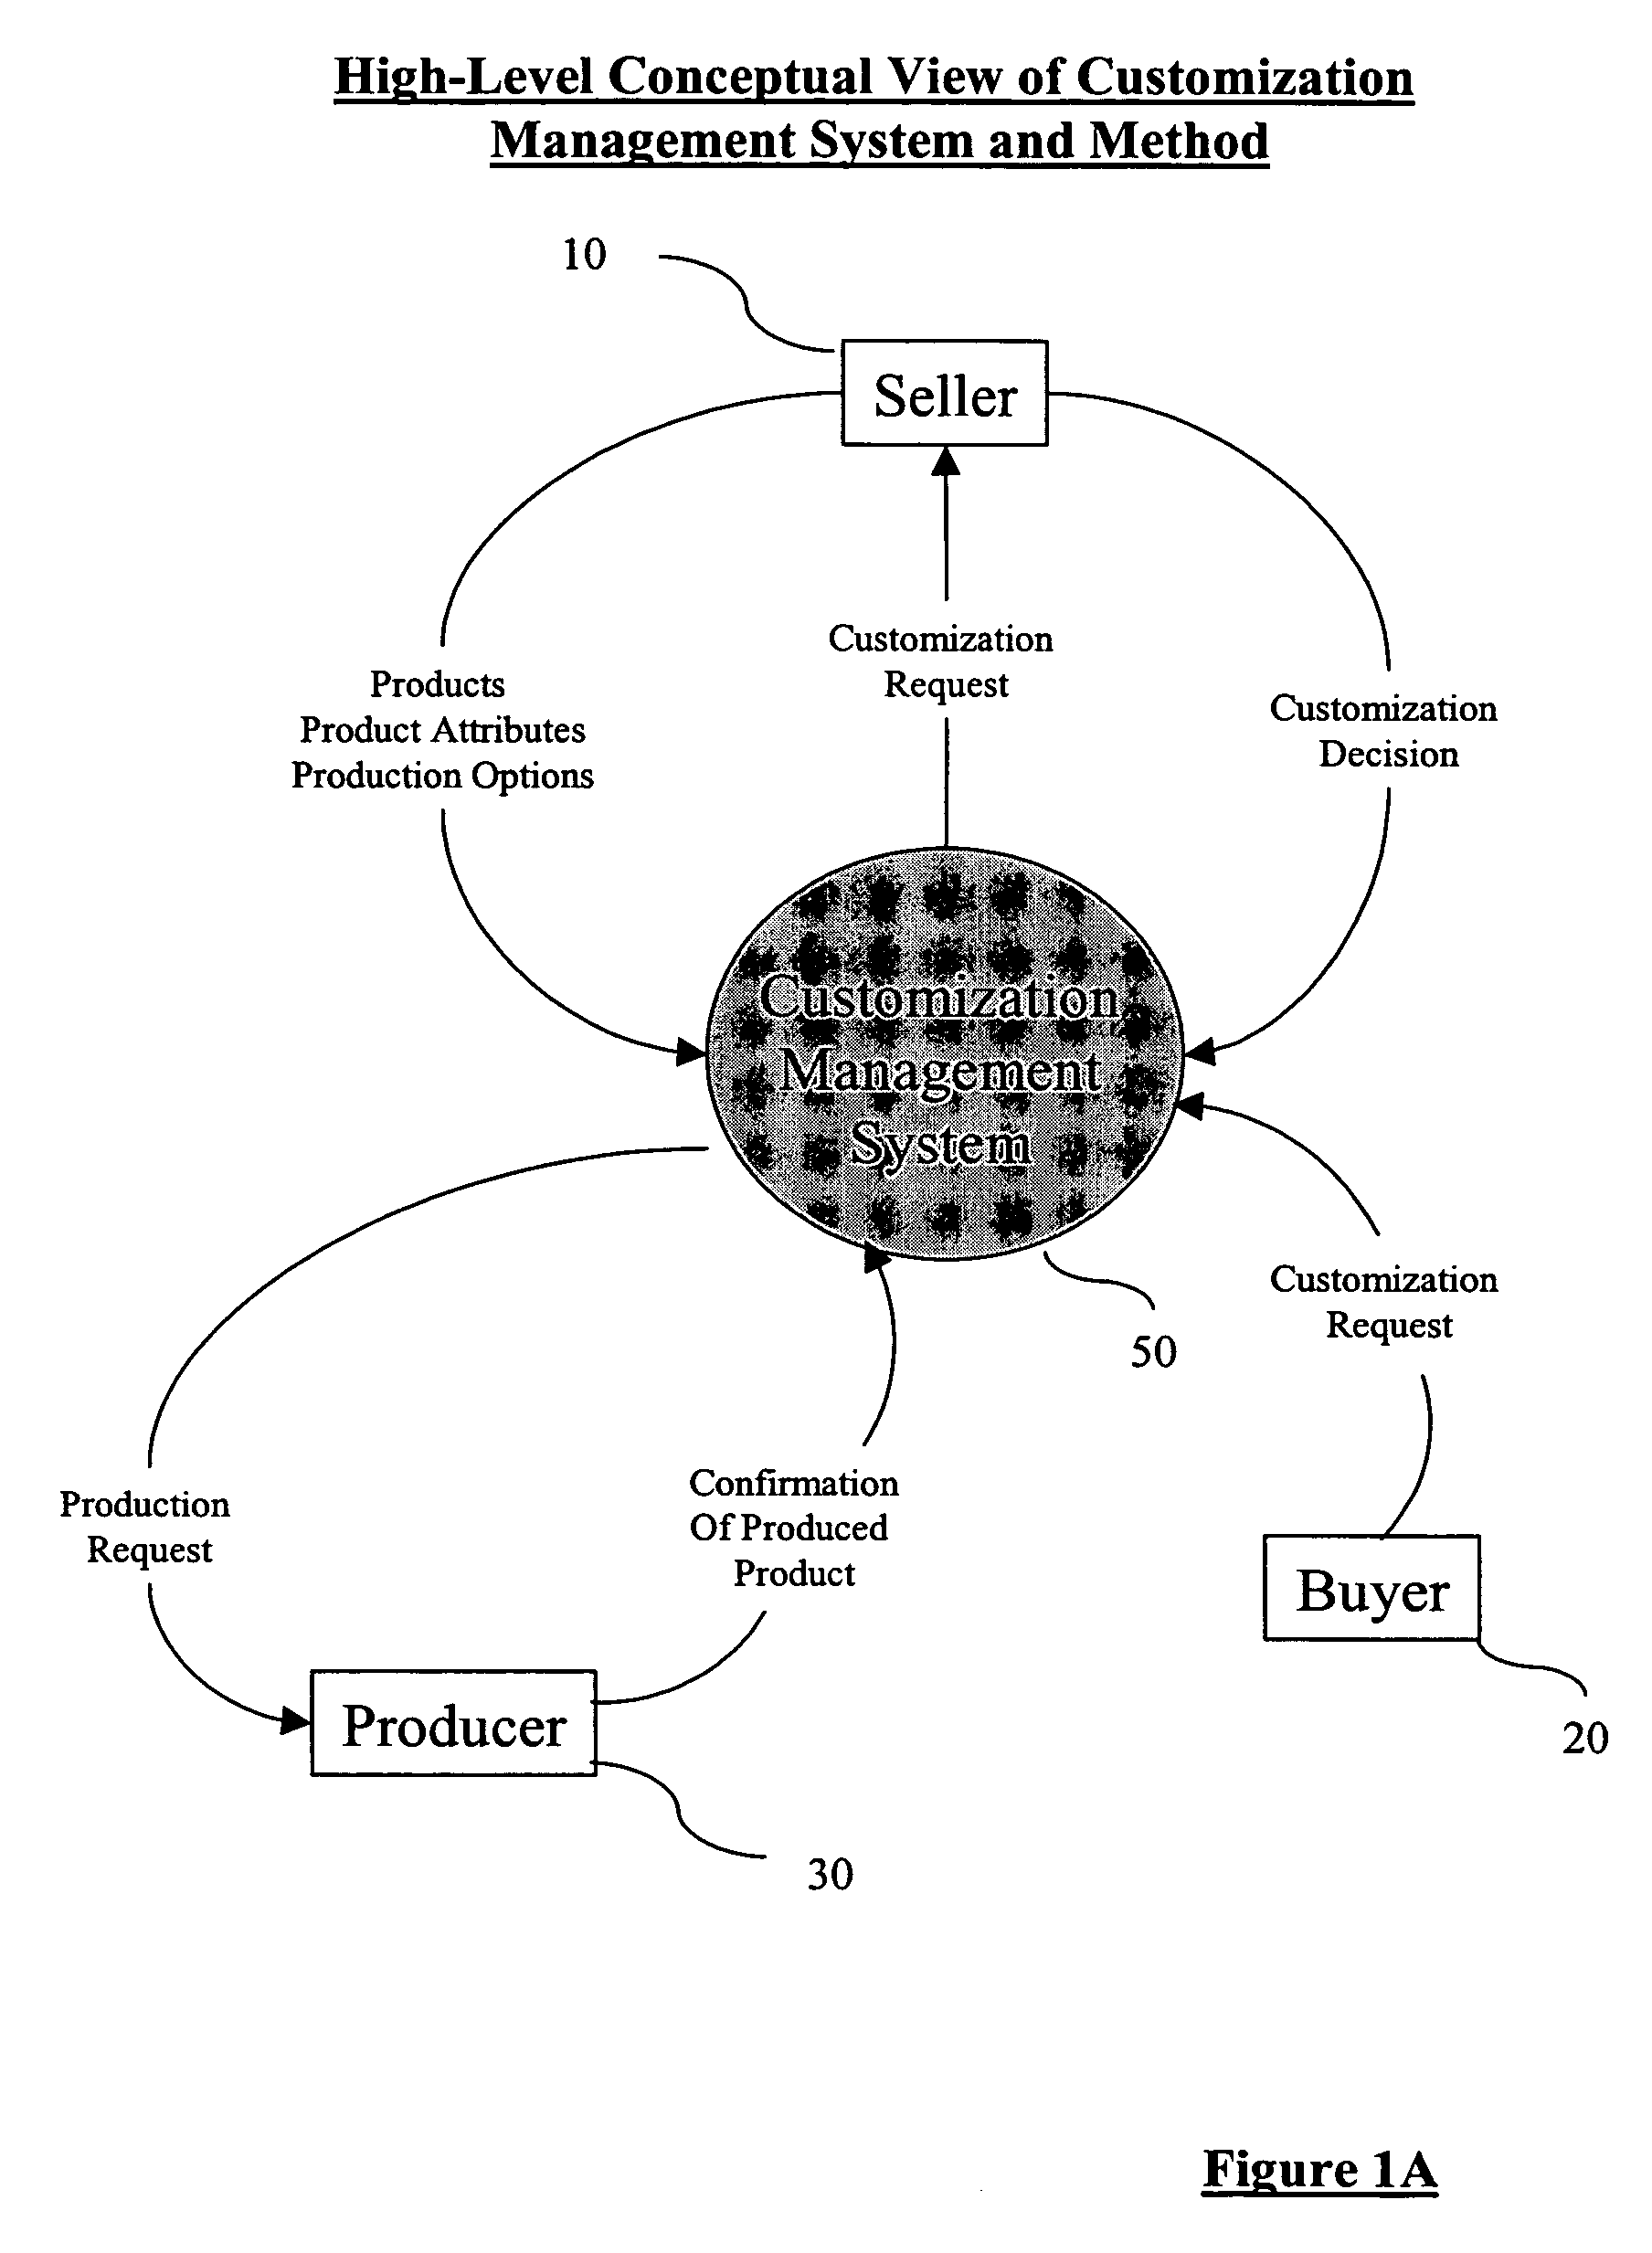 System and method for managing product customization